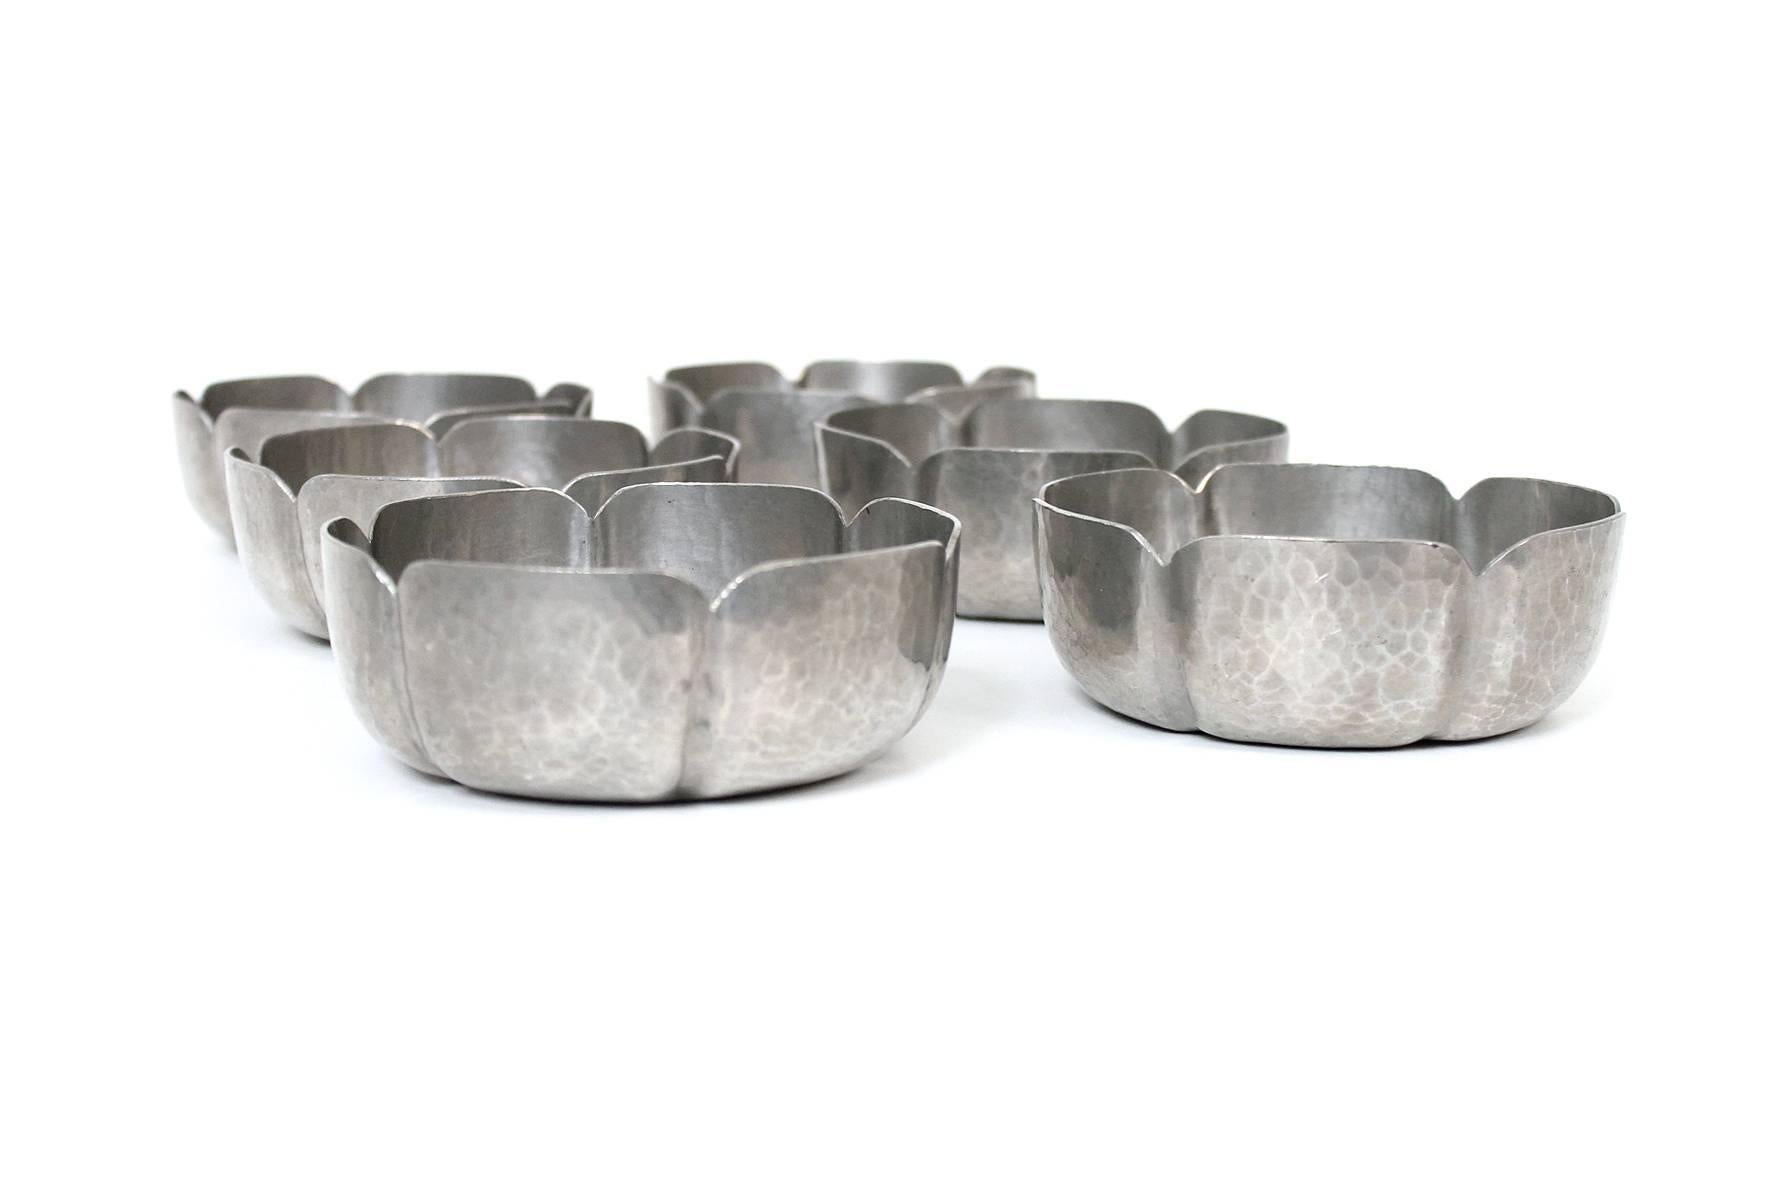 Early 20th Century Set of George Gebelein Pewter Bowls